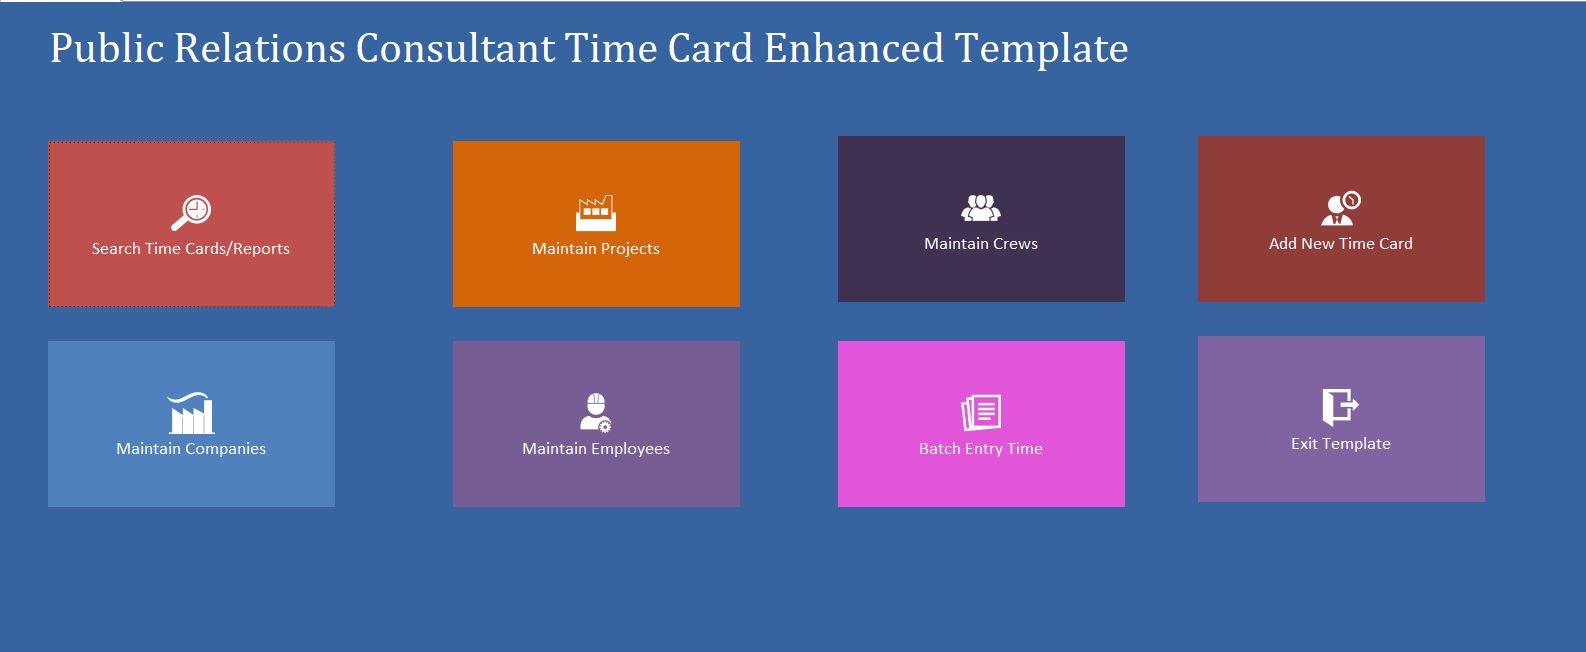 Enhanced Public Relations Time Card Template | Time Card Database